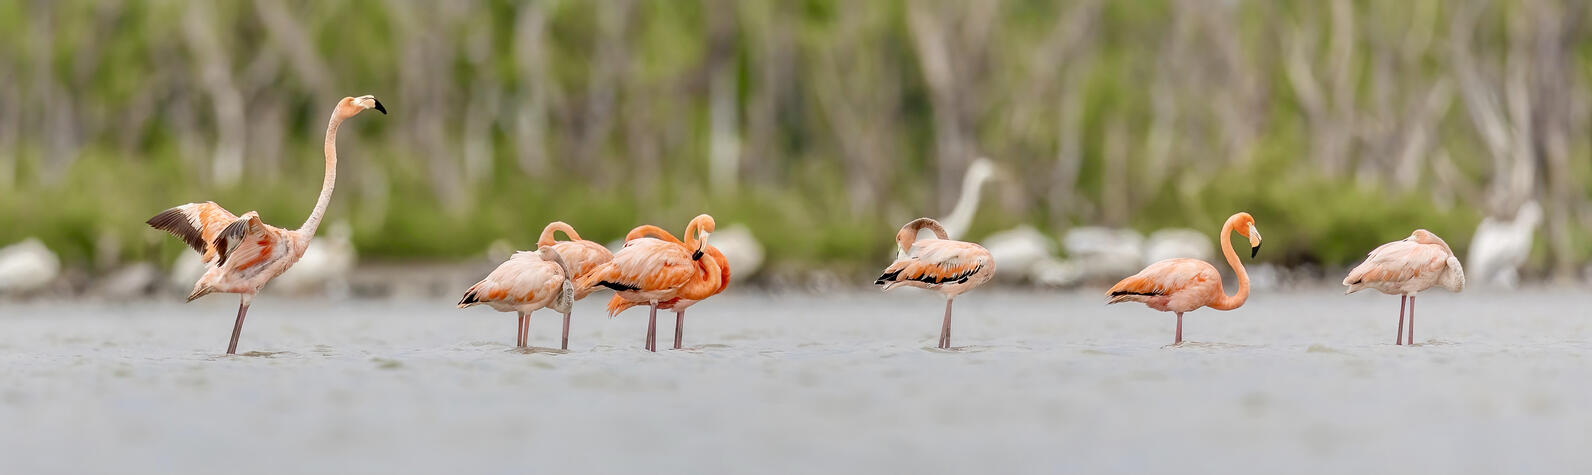 Flamingos stand in the water